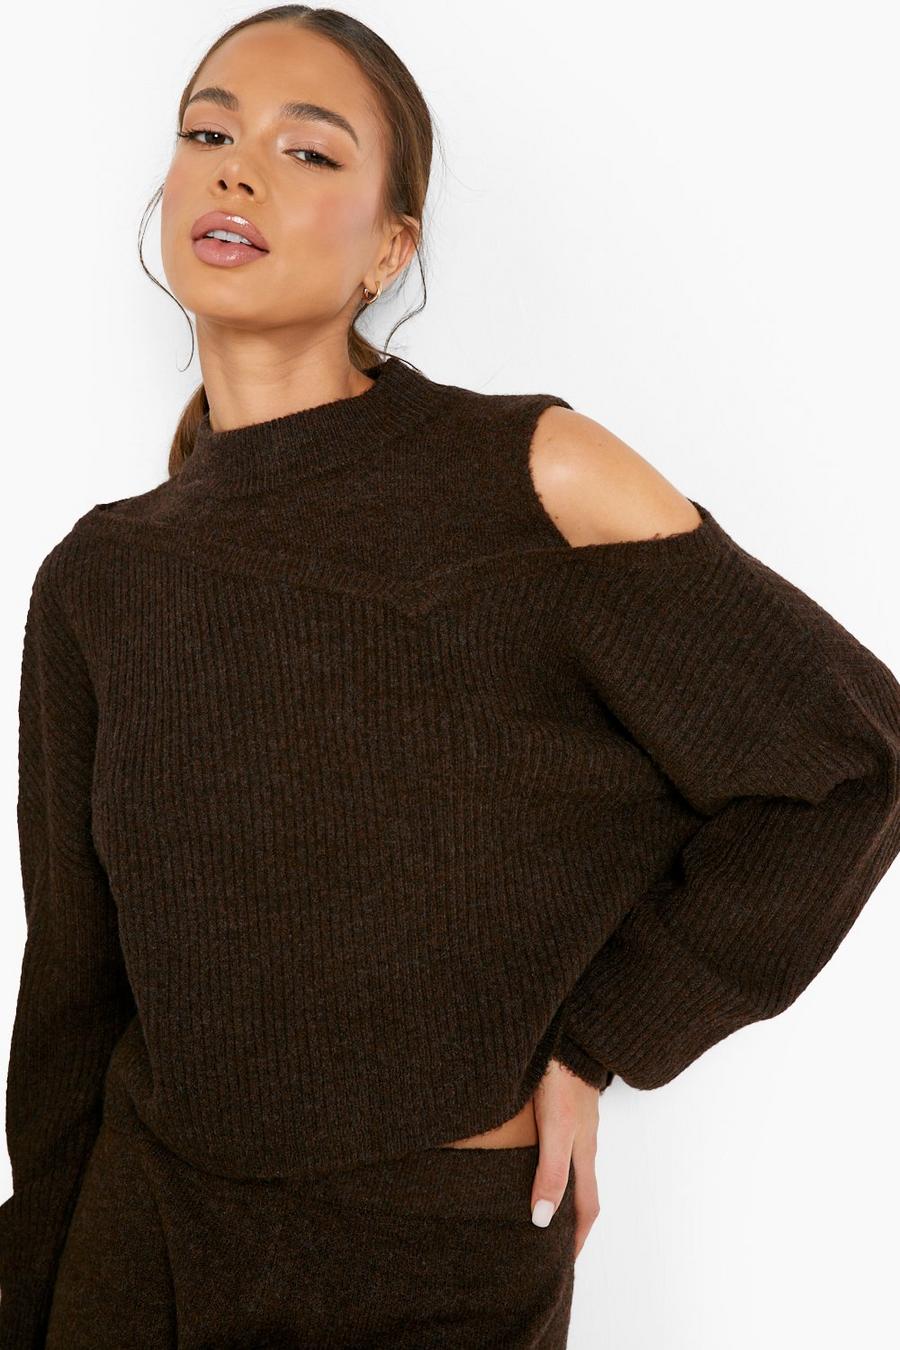 Chocolate brown Recycled Premium Super Soft Knit Cut Out Sweater